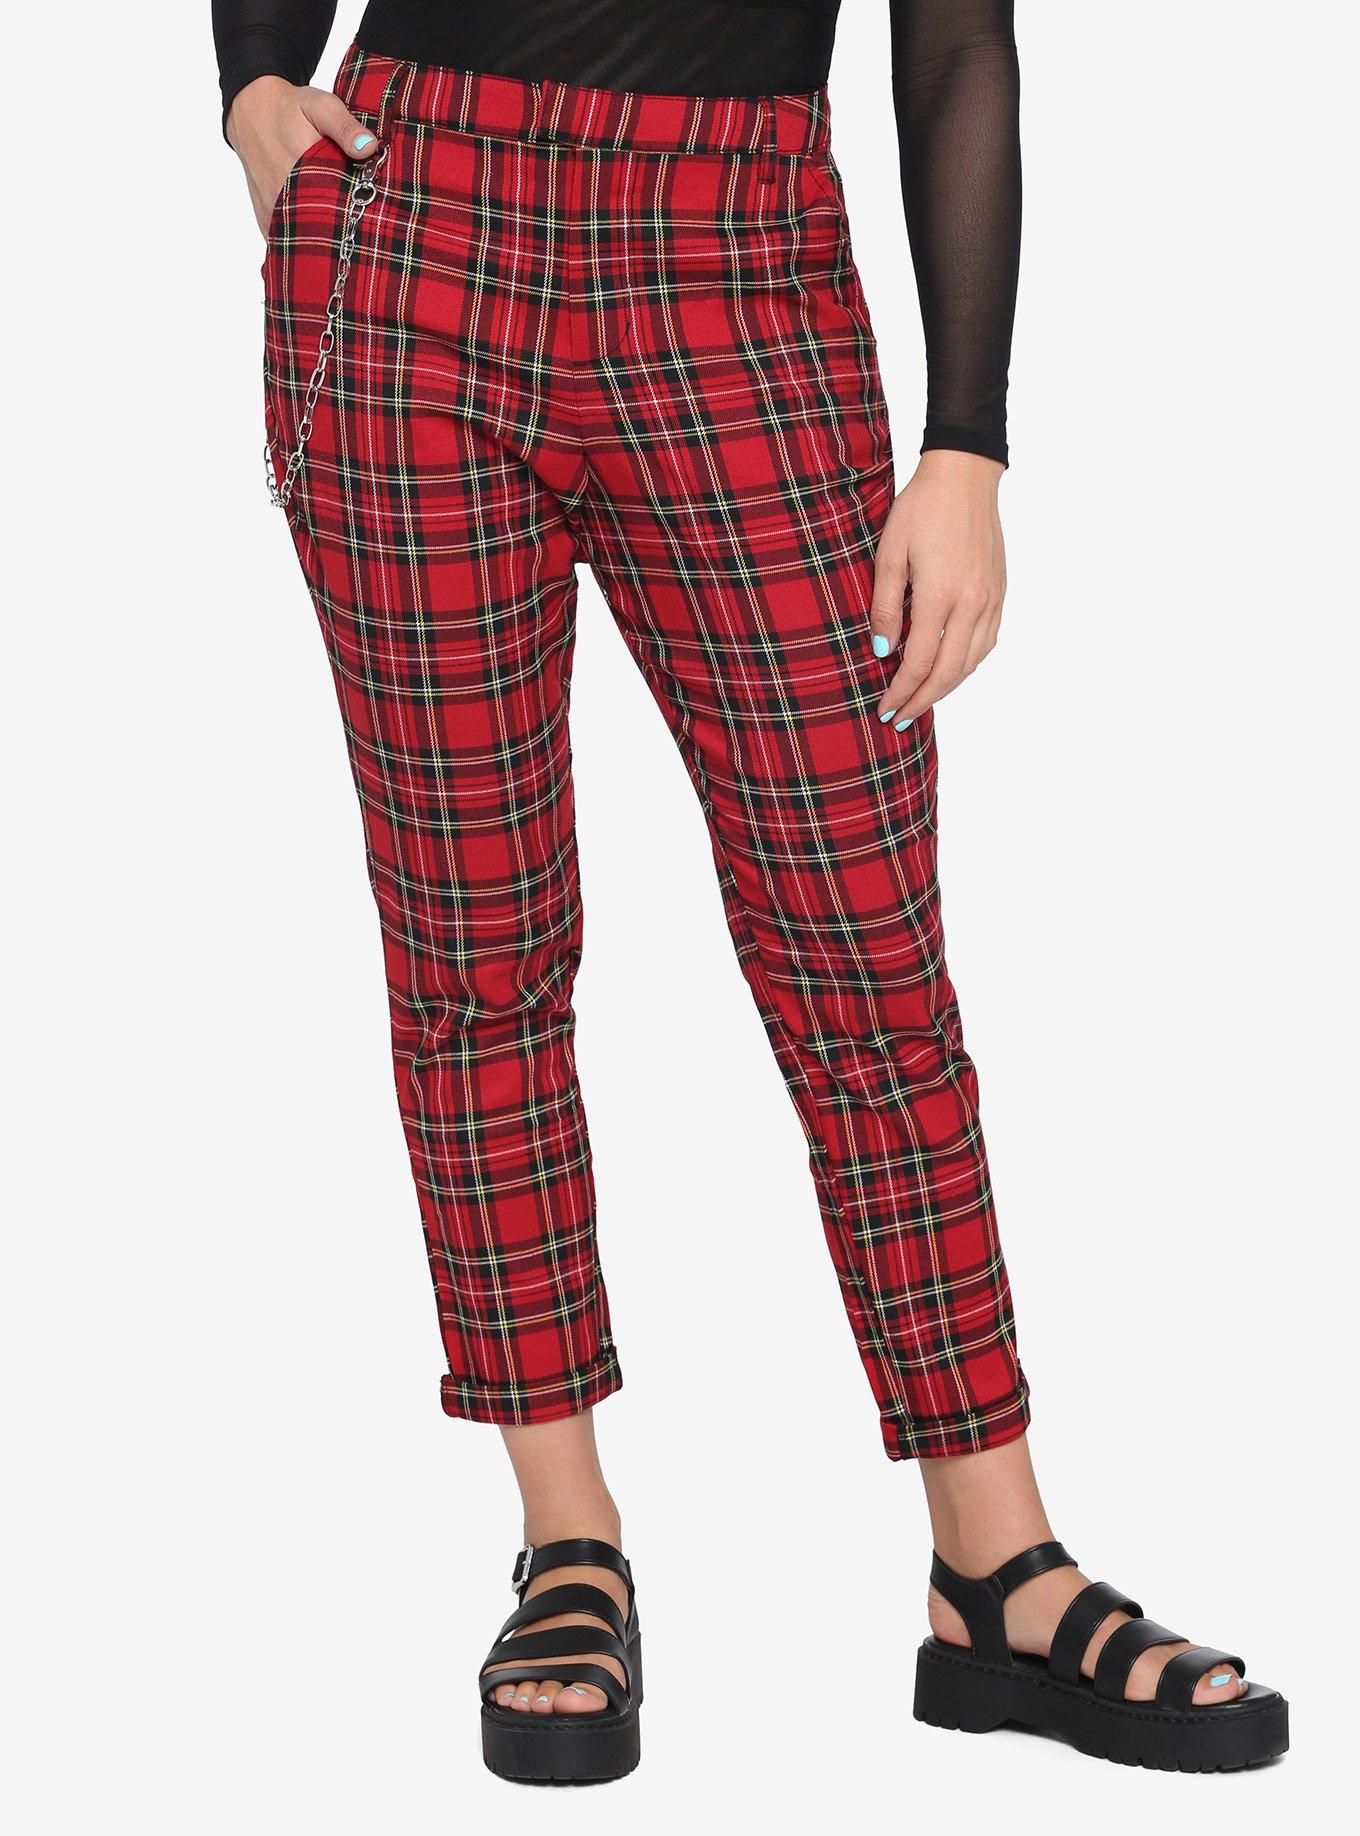 Hot Topic Womens Pants Rainbow Plaid NO Chain Not Included